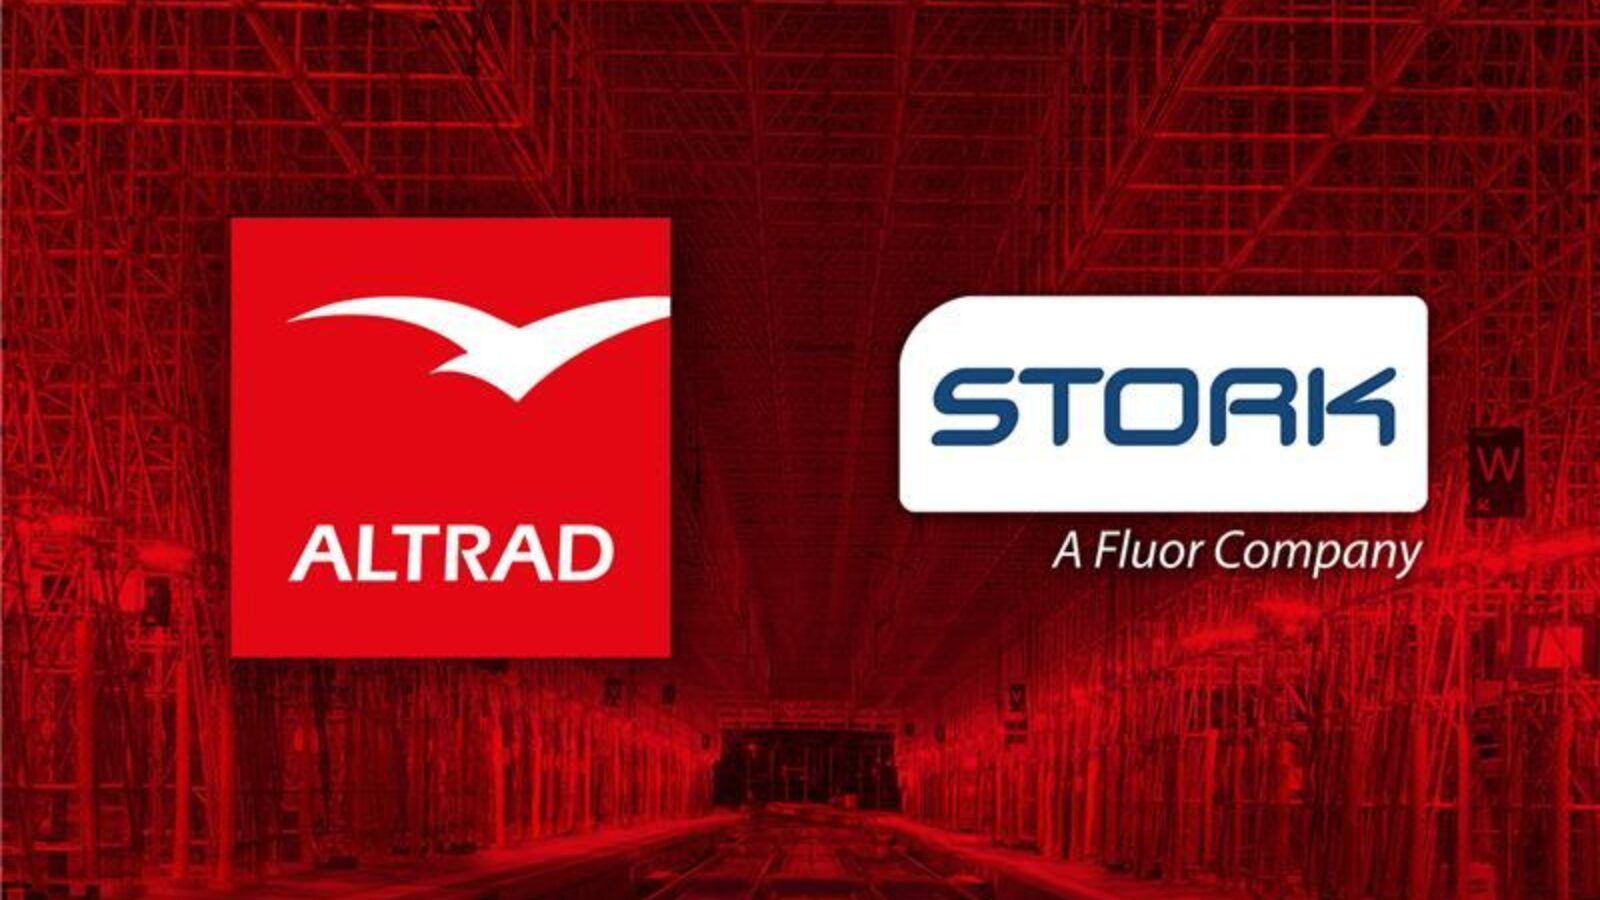 Altrad reach agreement to acquire Stork UK